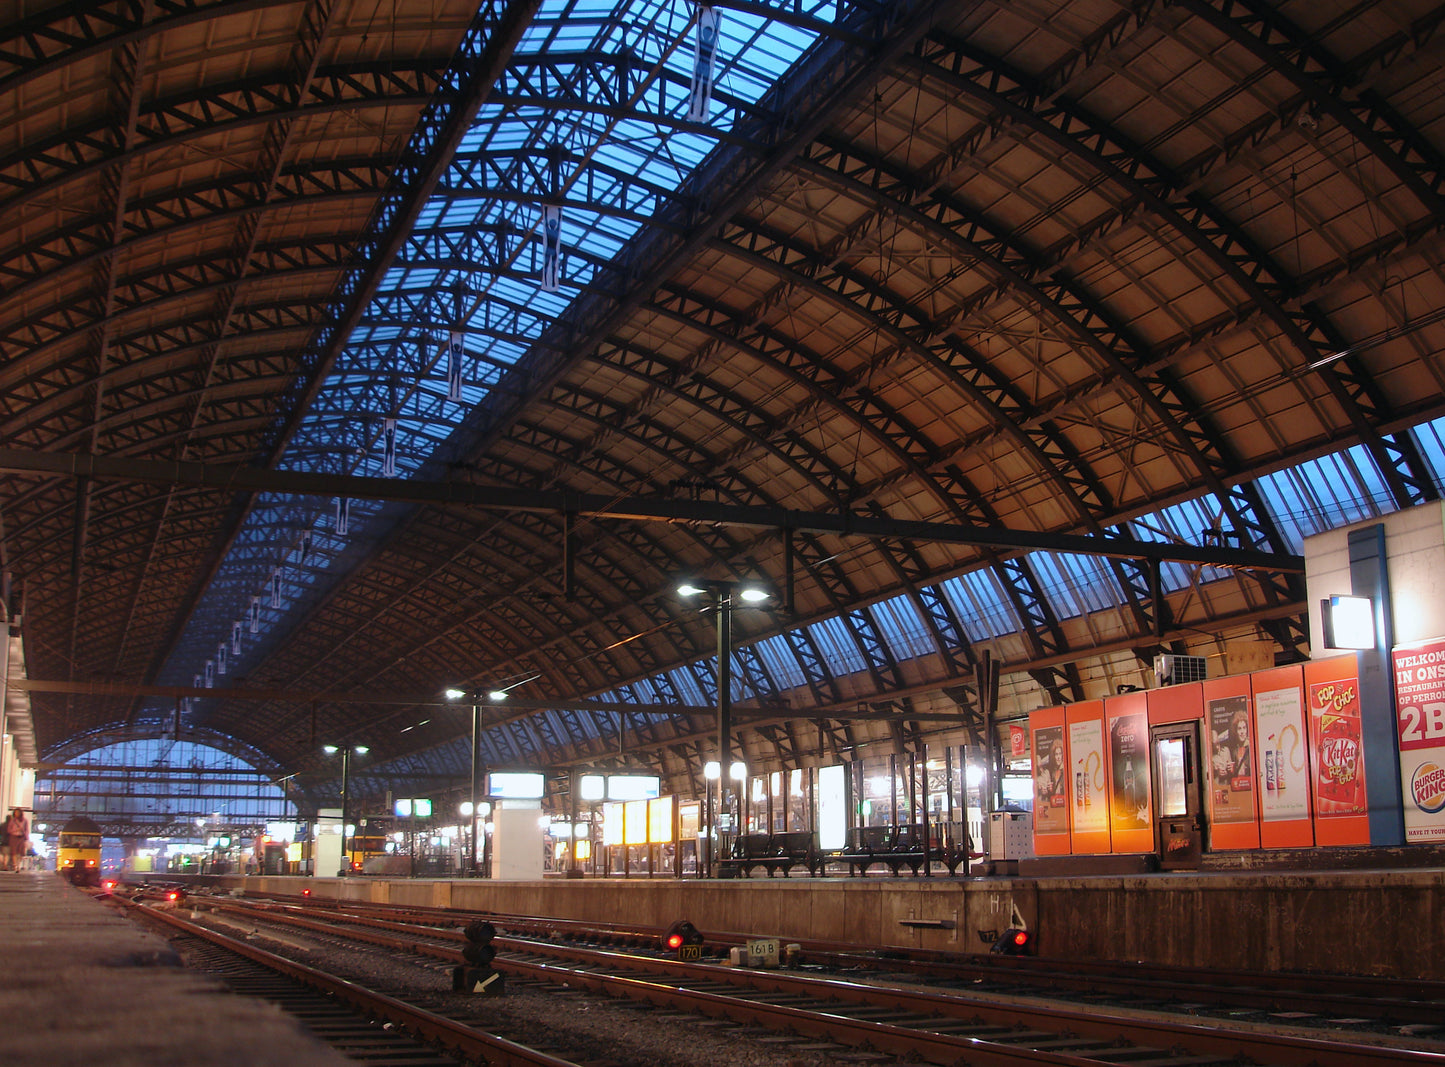 AMSTERDAM CENTRAAL TRAIN STATION GLOSSY POSTER PICTURE PHOTO PRINT BANNER